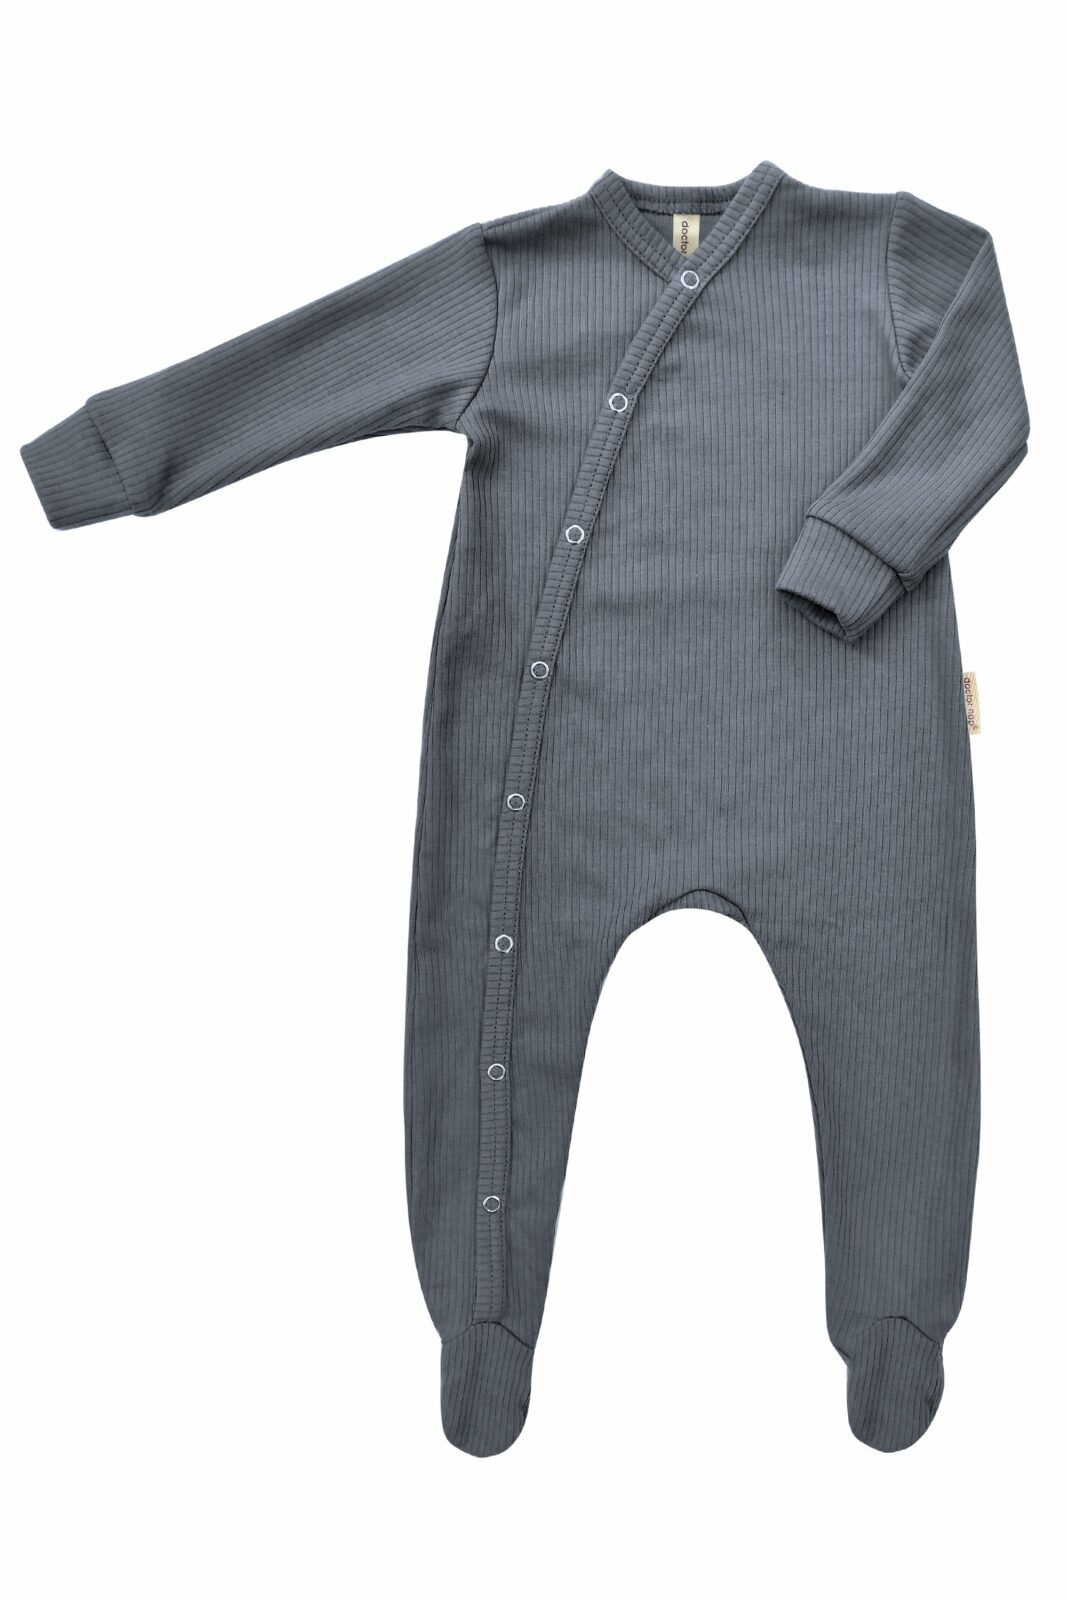 Doctor Nap Kids's Overall